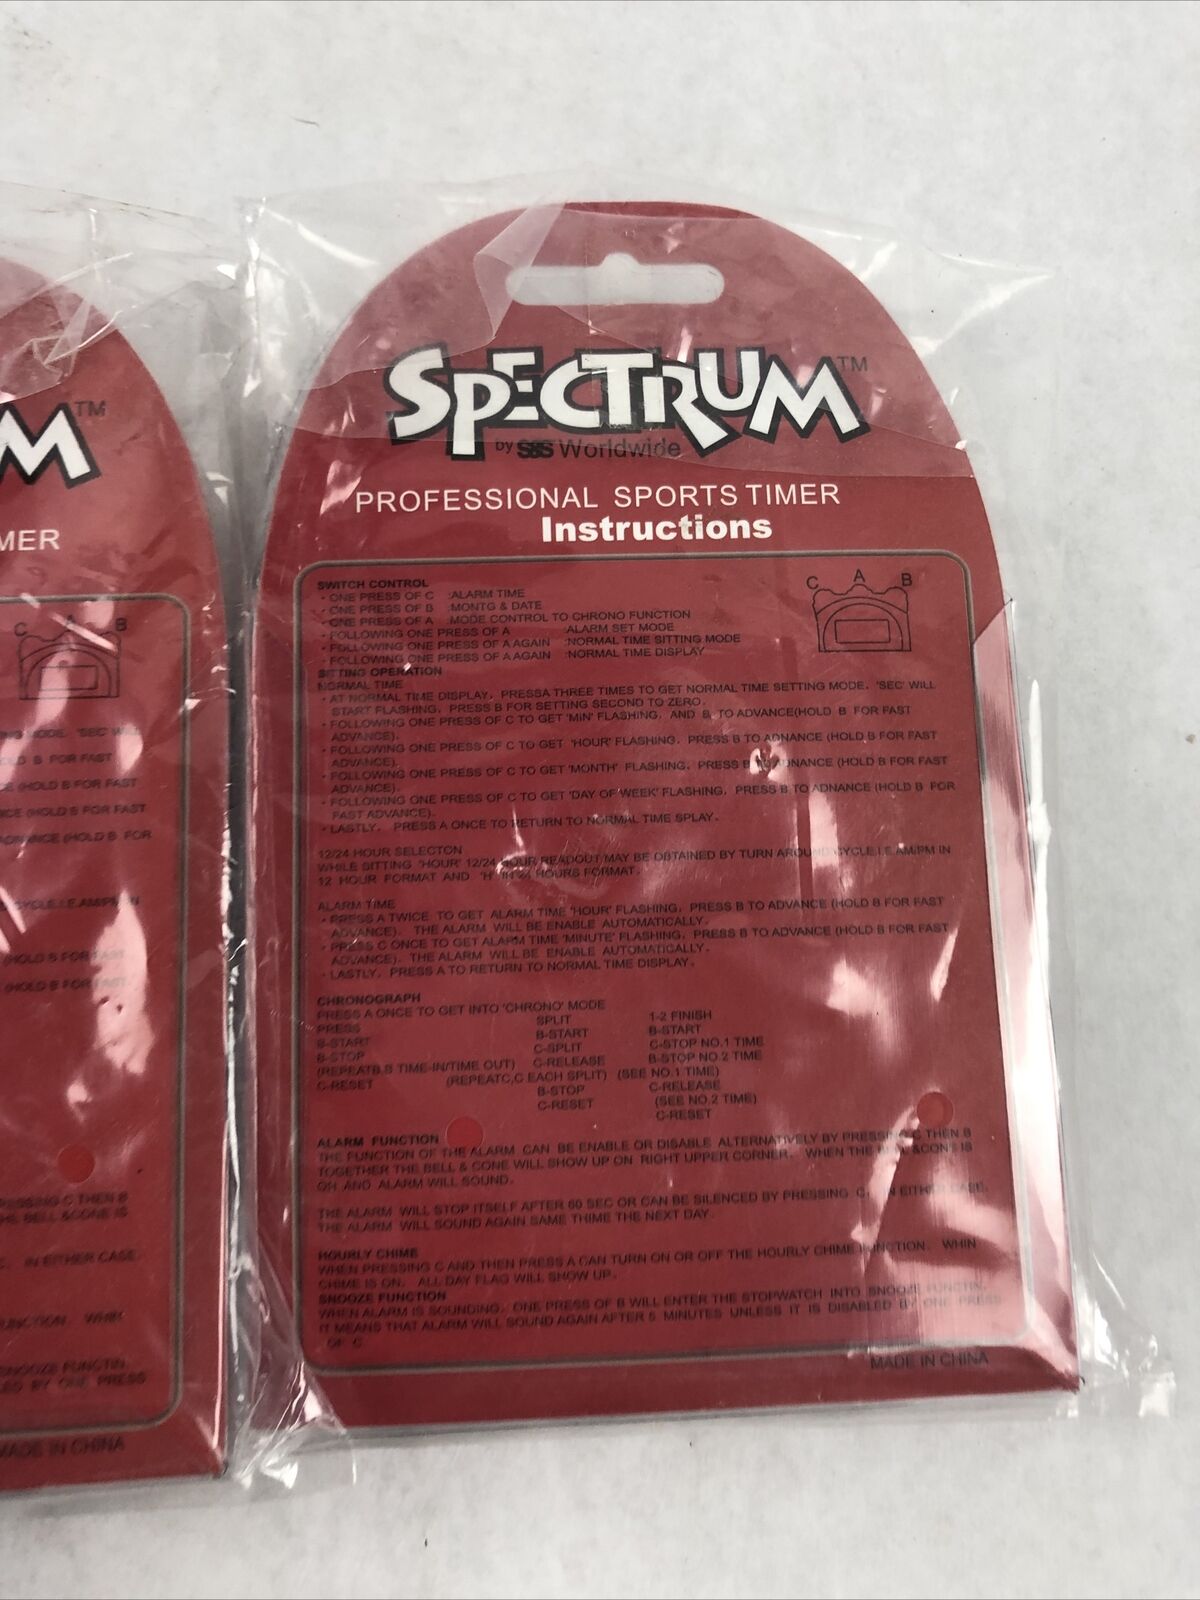 Spectrum W7526 Lot of 3 Stopwatches (1 Red & 2 Purple)